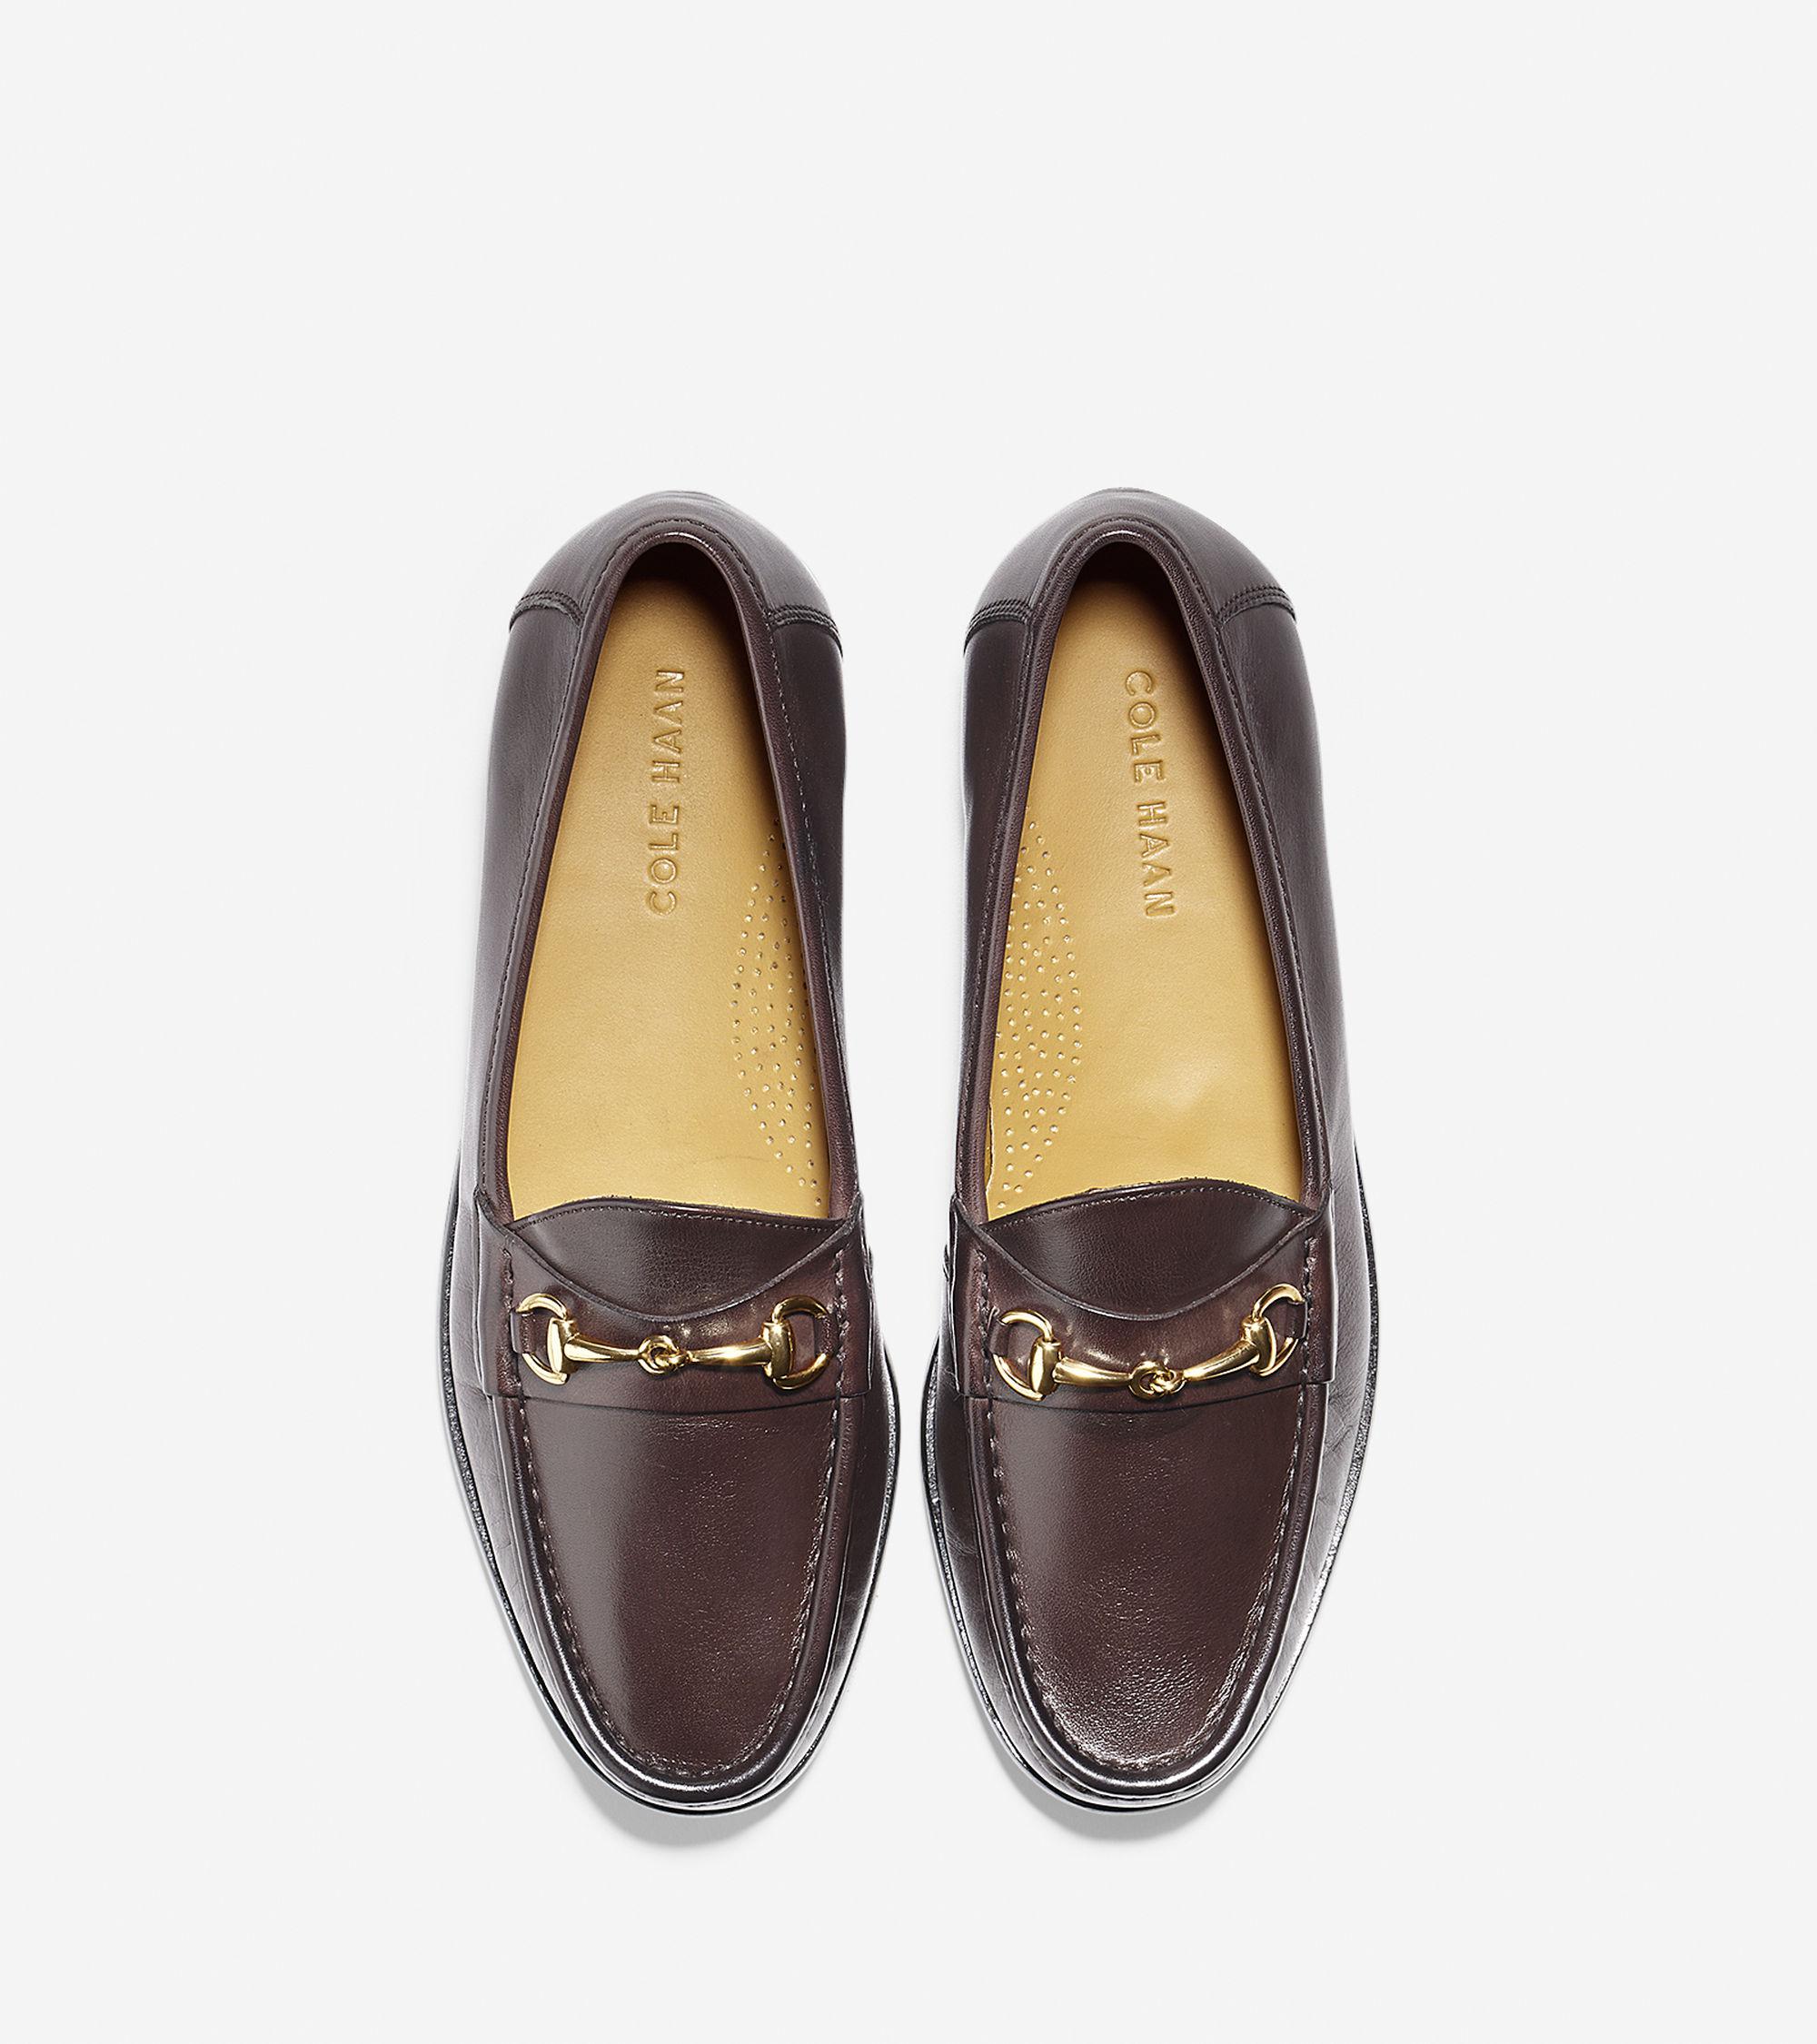 Lyst - Cole Haan Ascot Calfskin Loafers in Brown for Men